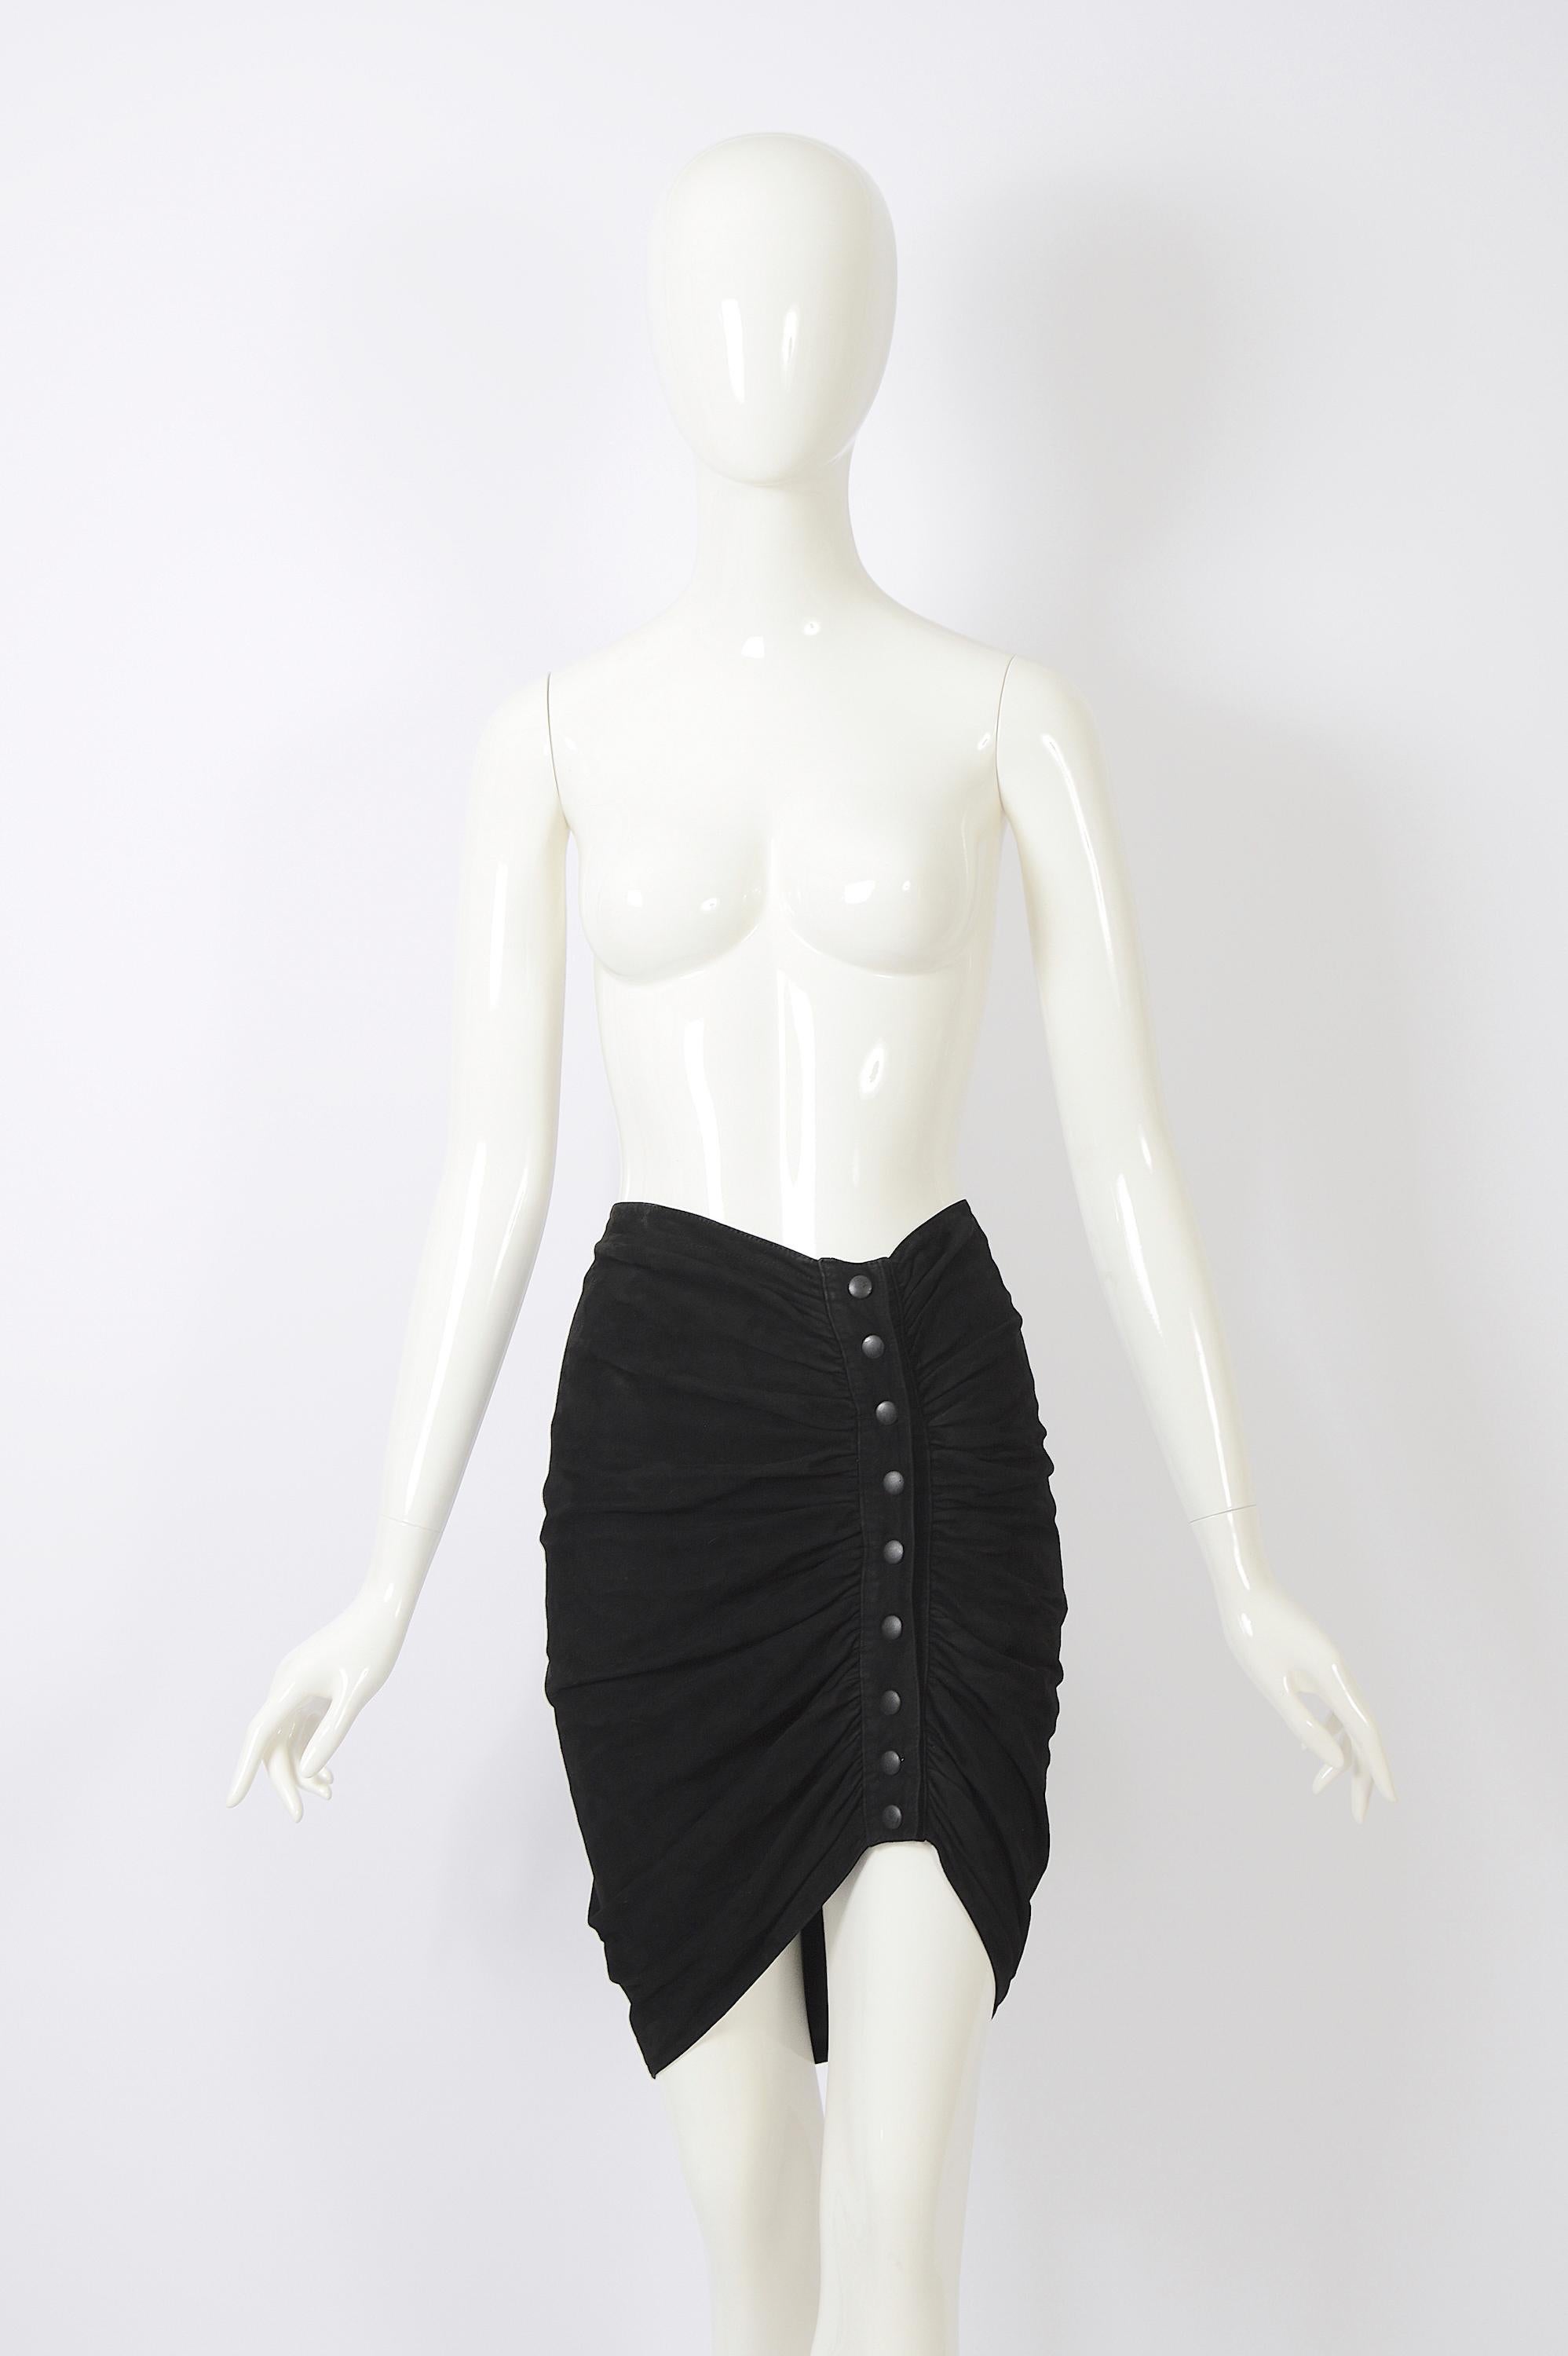 This skirt is a rare piece from Azzedine Alaia's vintage Fall/Winter 1983 collection, showcasing the early years of his incredible career. Crafted from black suede, it features a fitted silhouette and an asymmetric hemline. The draped front opening